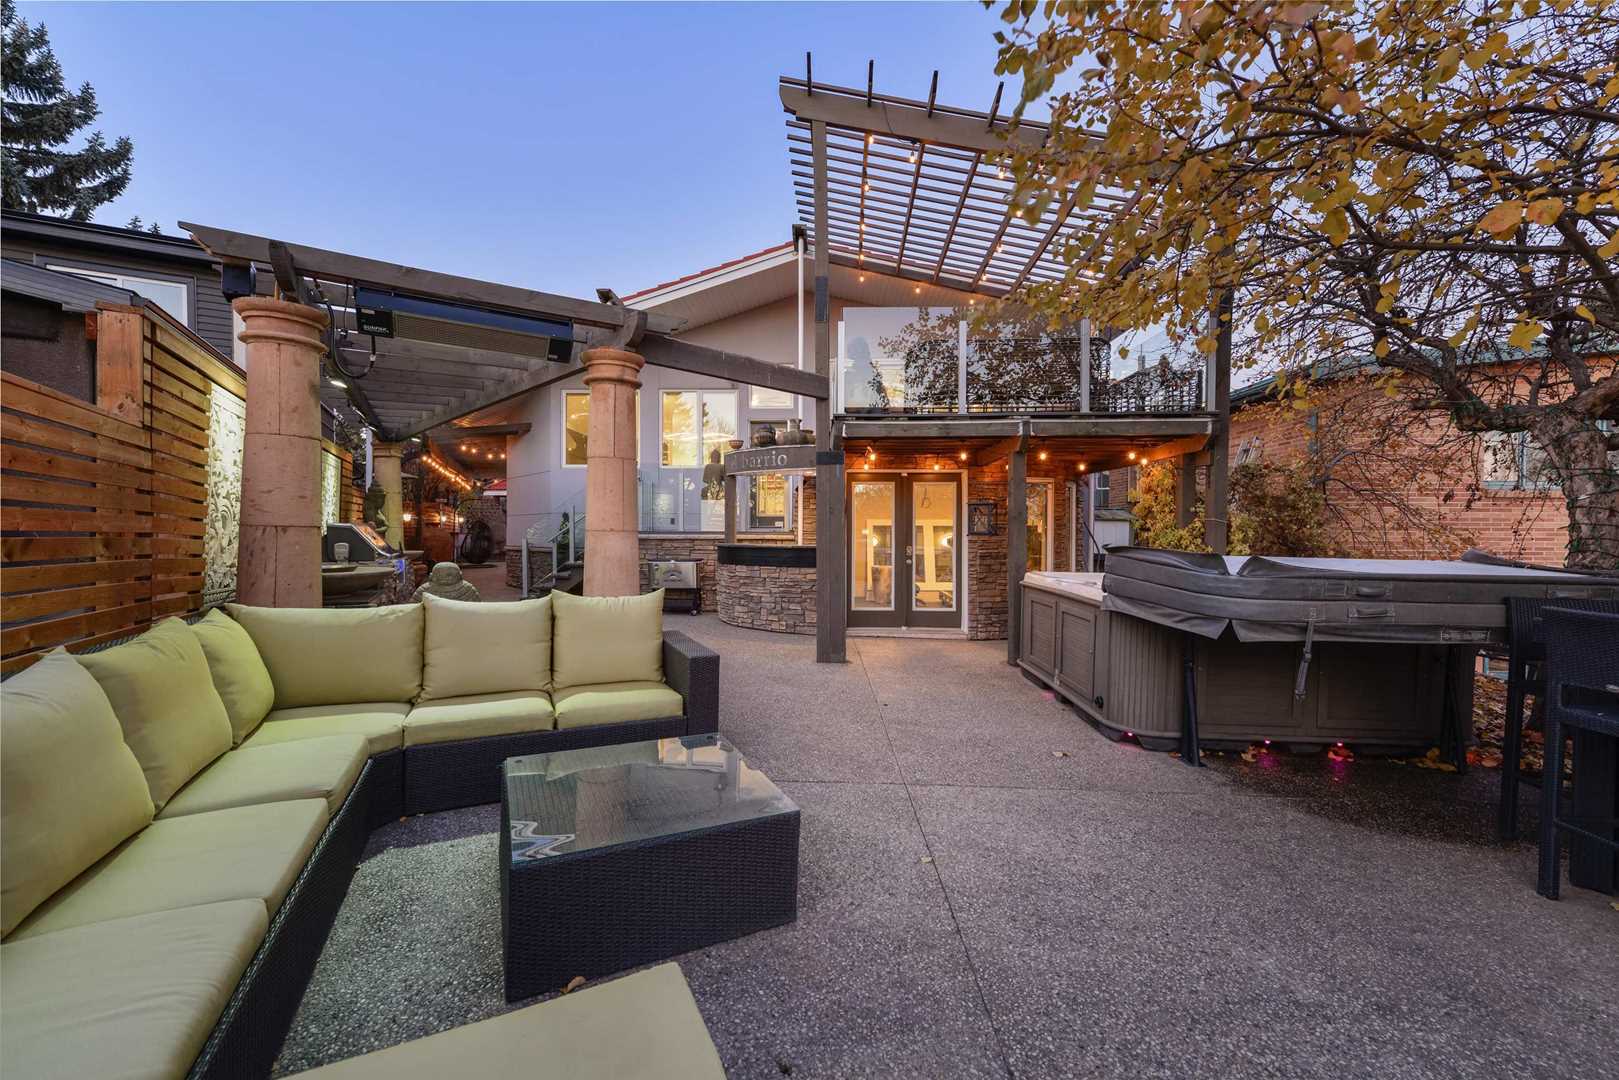 Backyard patio with cement floor; green sectional couch on left, hot tub on right, pergola and bar in background leading to house